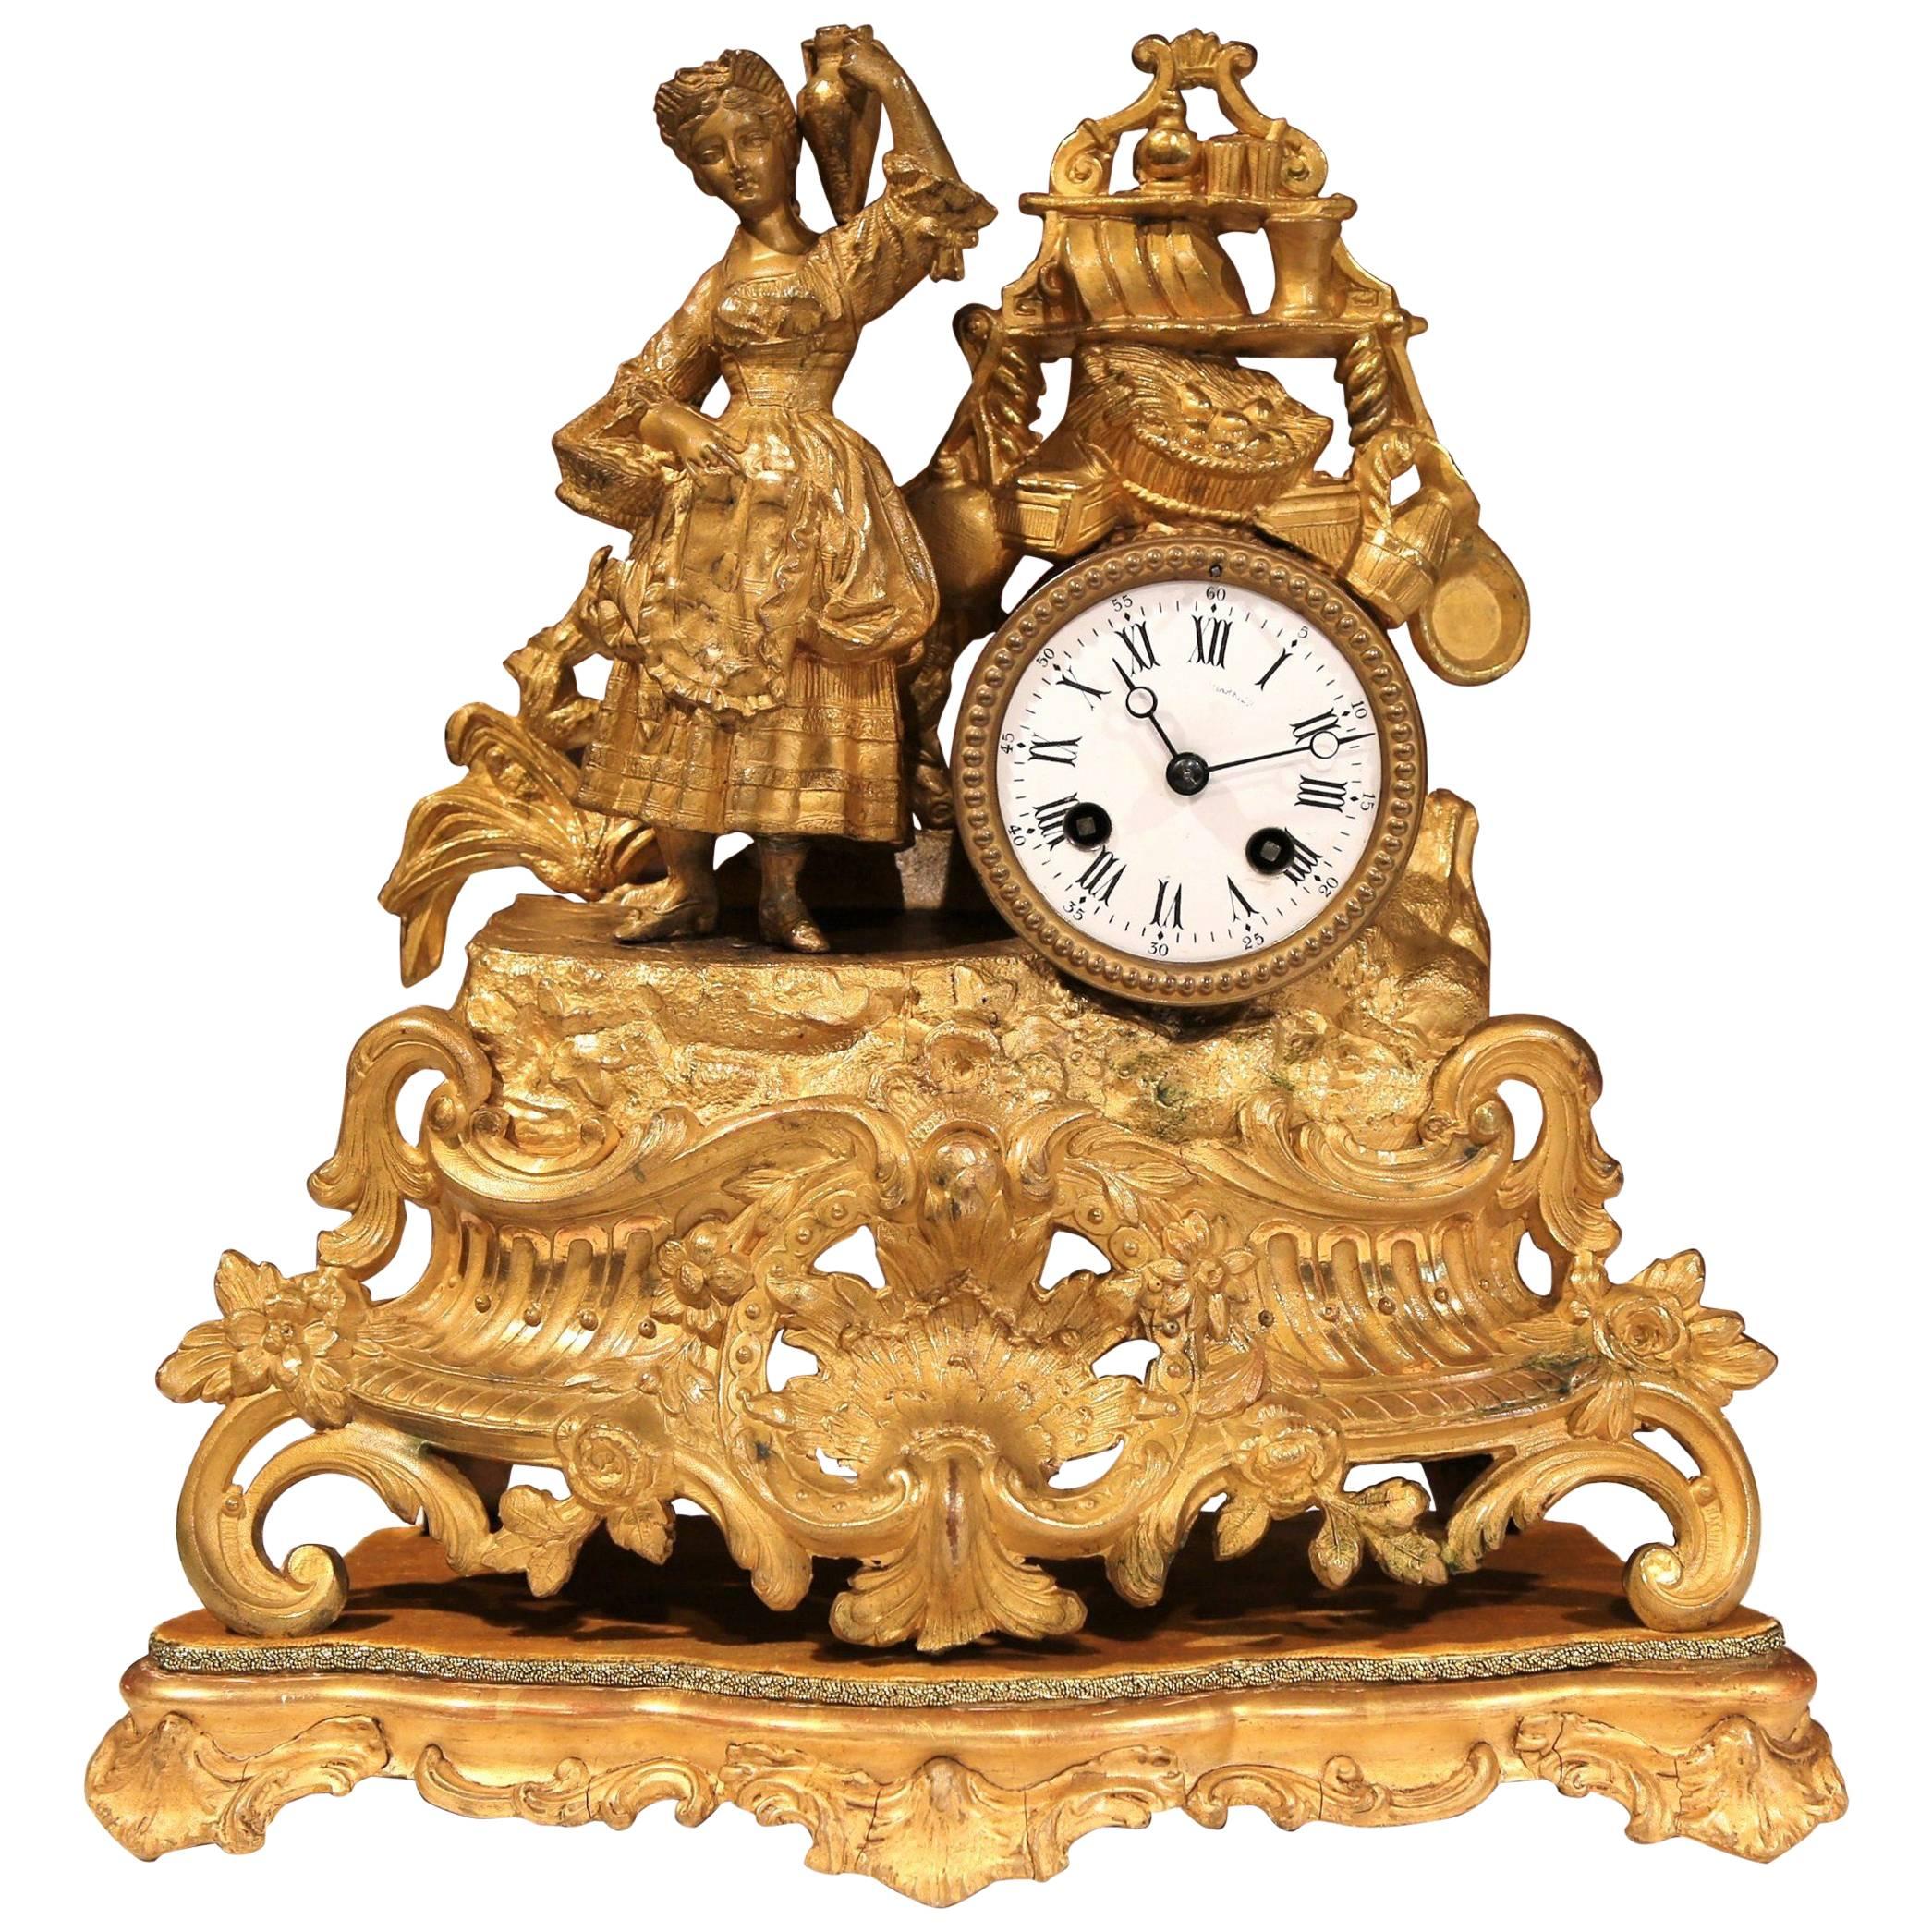 19th Century French Gold-Plated Mantel Clock with Carved Wooden Gold Leaf Base